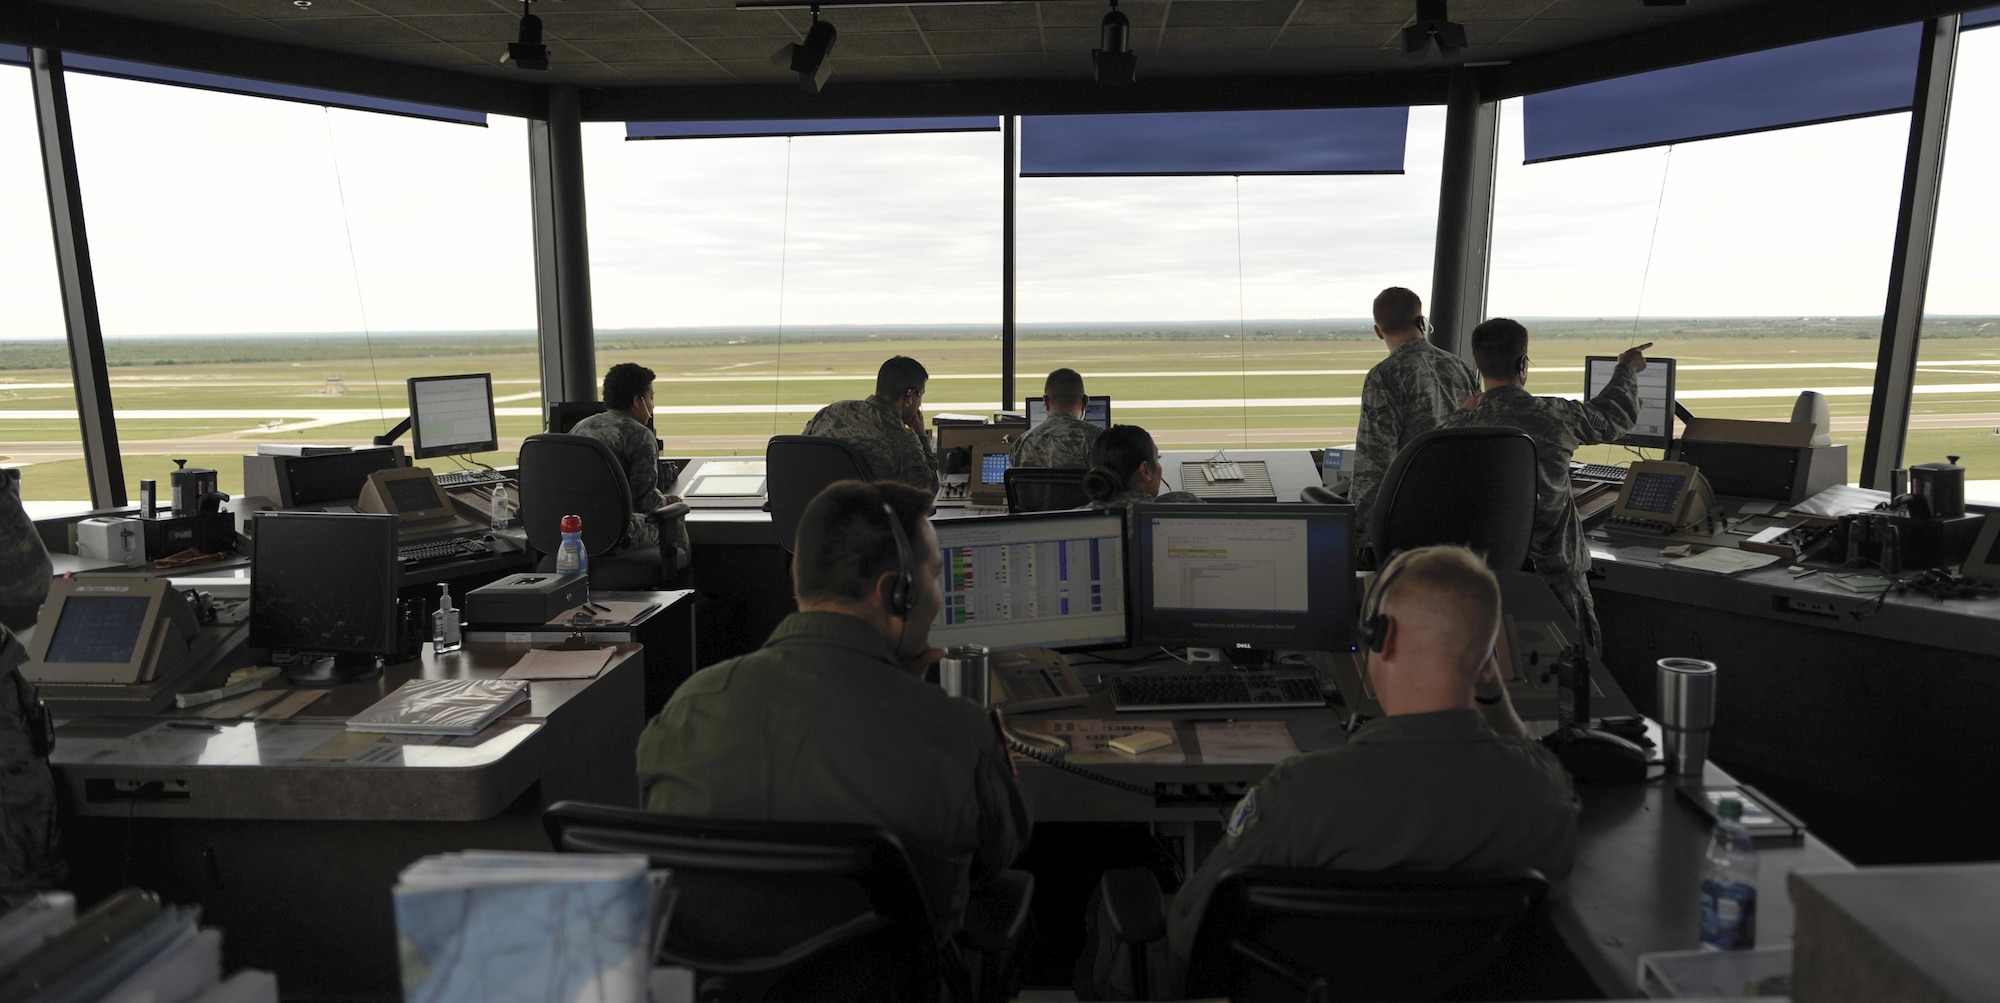 Airmen of the 47th Operations Support Squadron air traffic control tower perform their daily operations at Laughlin Air Force Base, Texas, Oct. 24, 2017. Laughlin’s tower is capable of operating with just four air traffic controllers, but with a busy training schedule, controllers in training must shadow certified controllers, which sometimes brings that number to eight. (U.S. Air Force/Airman 1st Class Benjamin N. Valmoja)